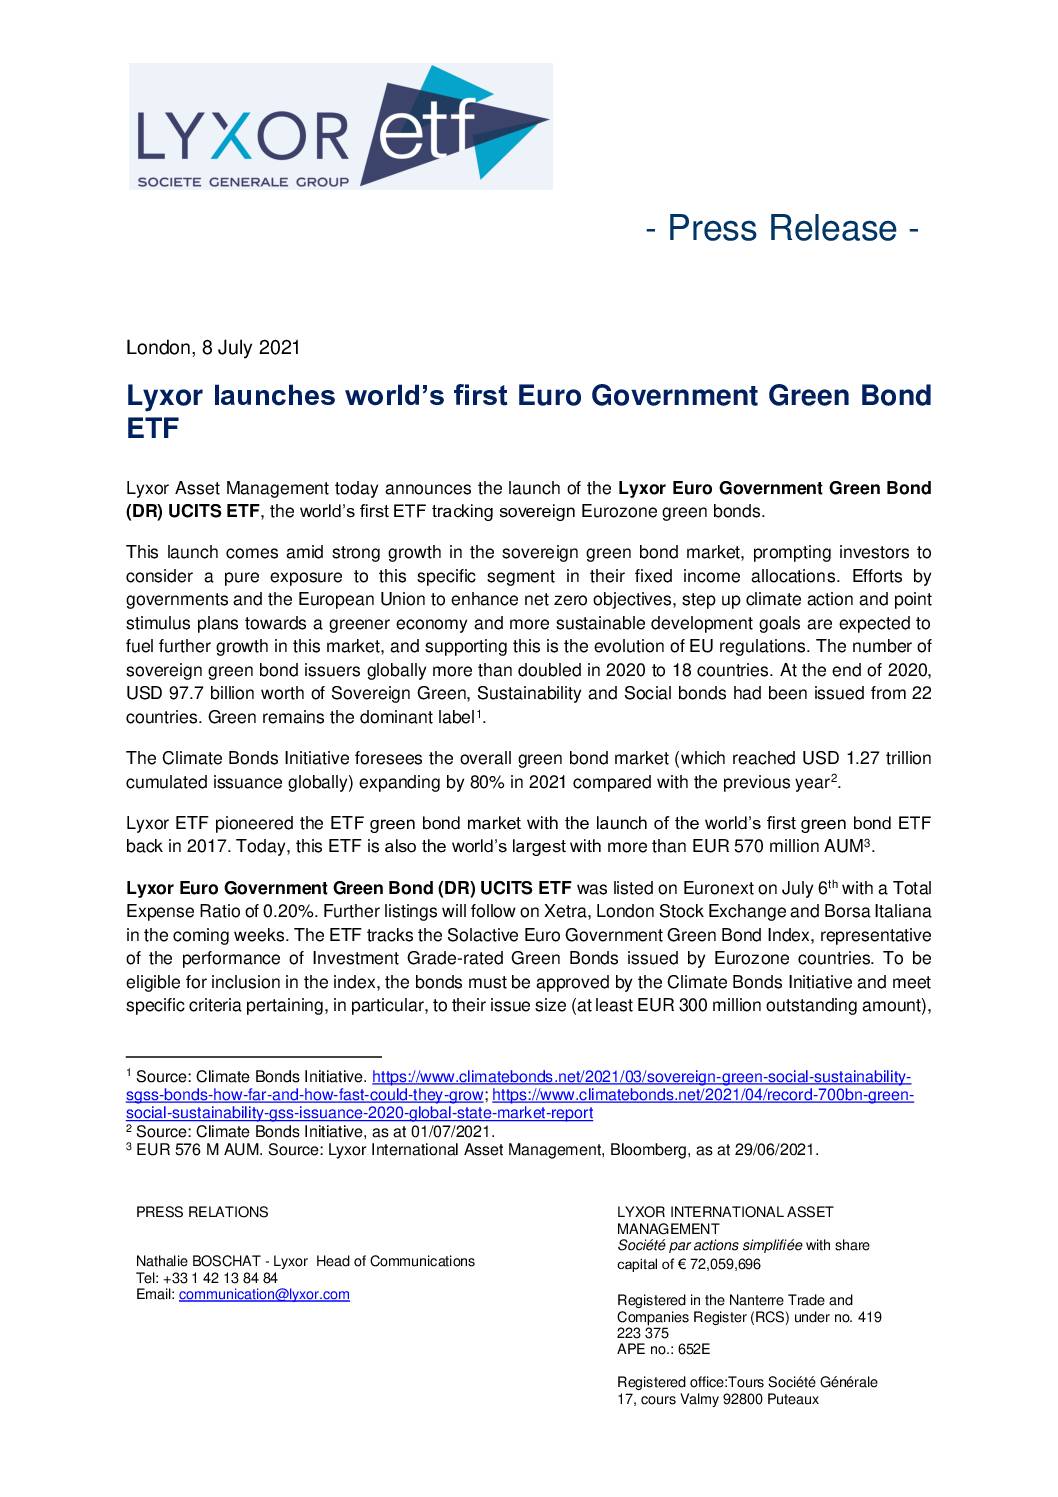 Lyxor Launches World’s First Euro Government Green Bond ETF